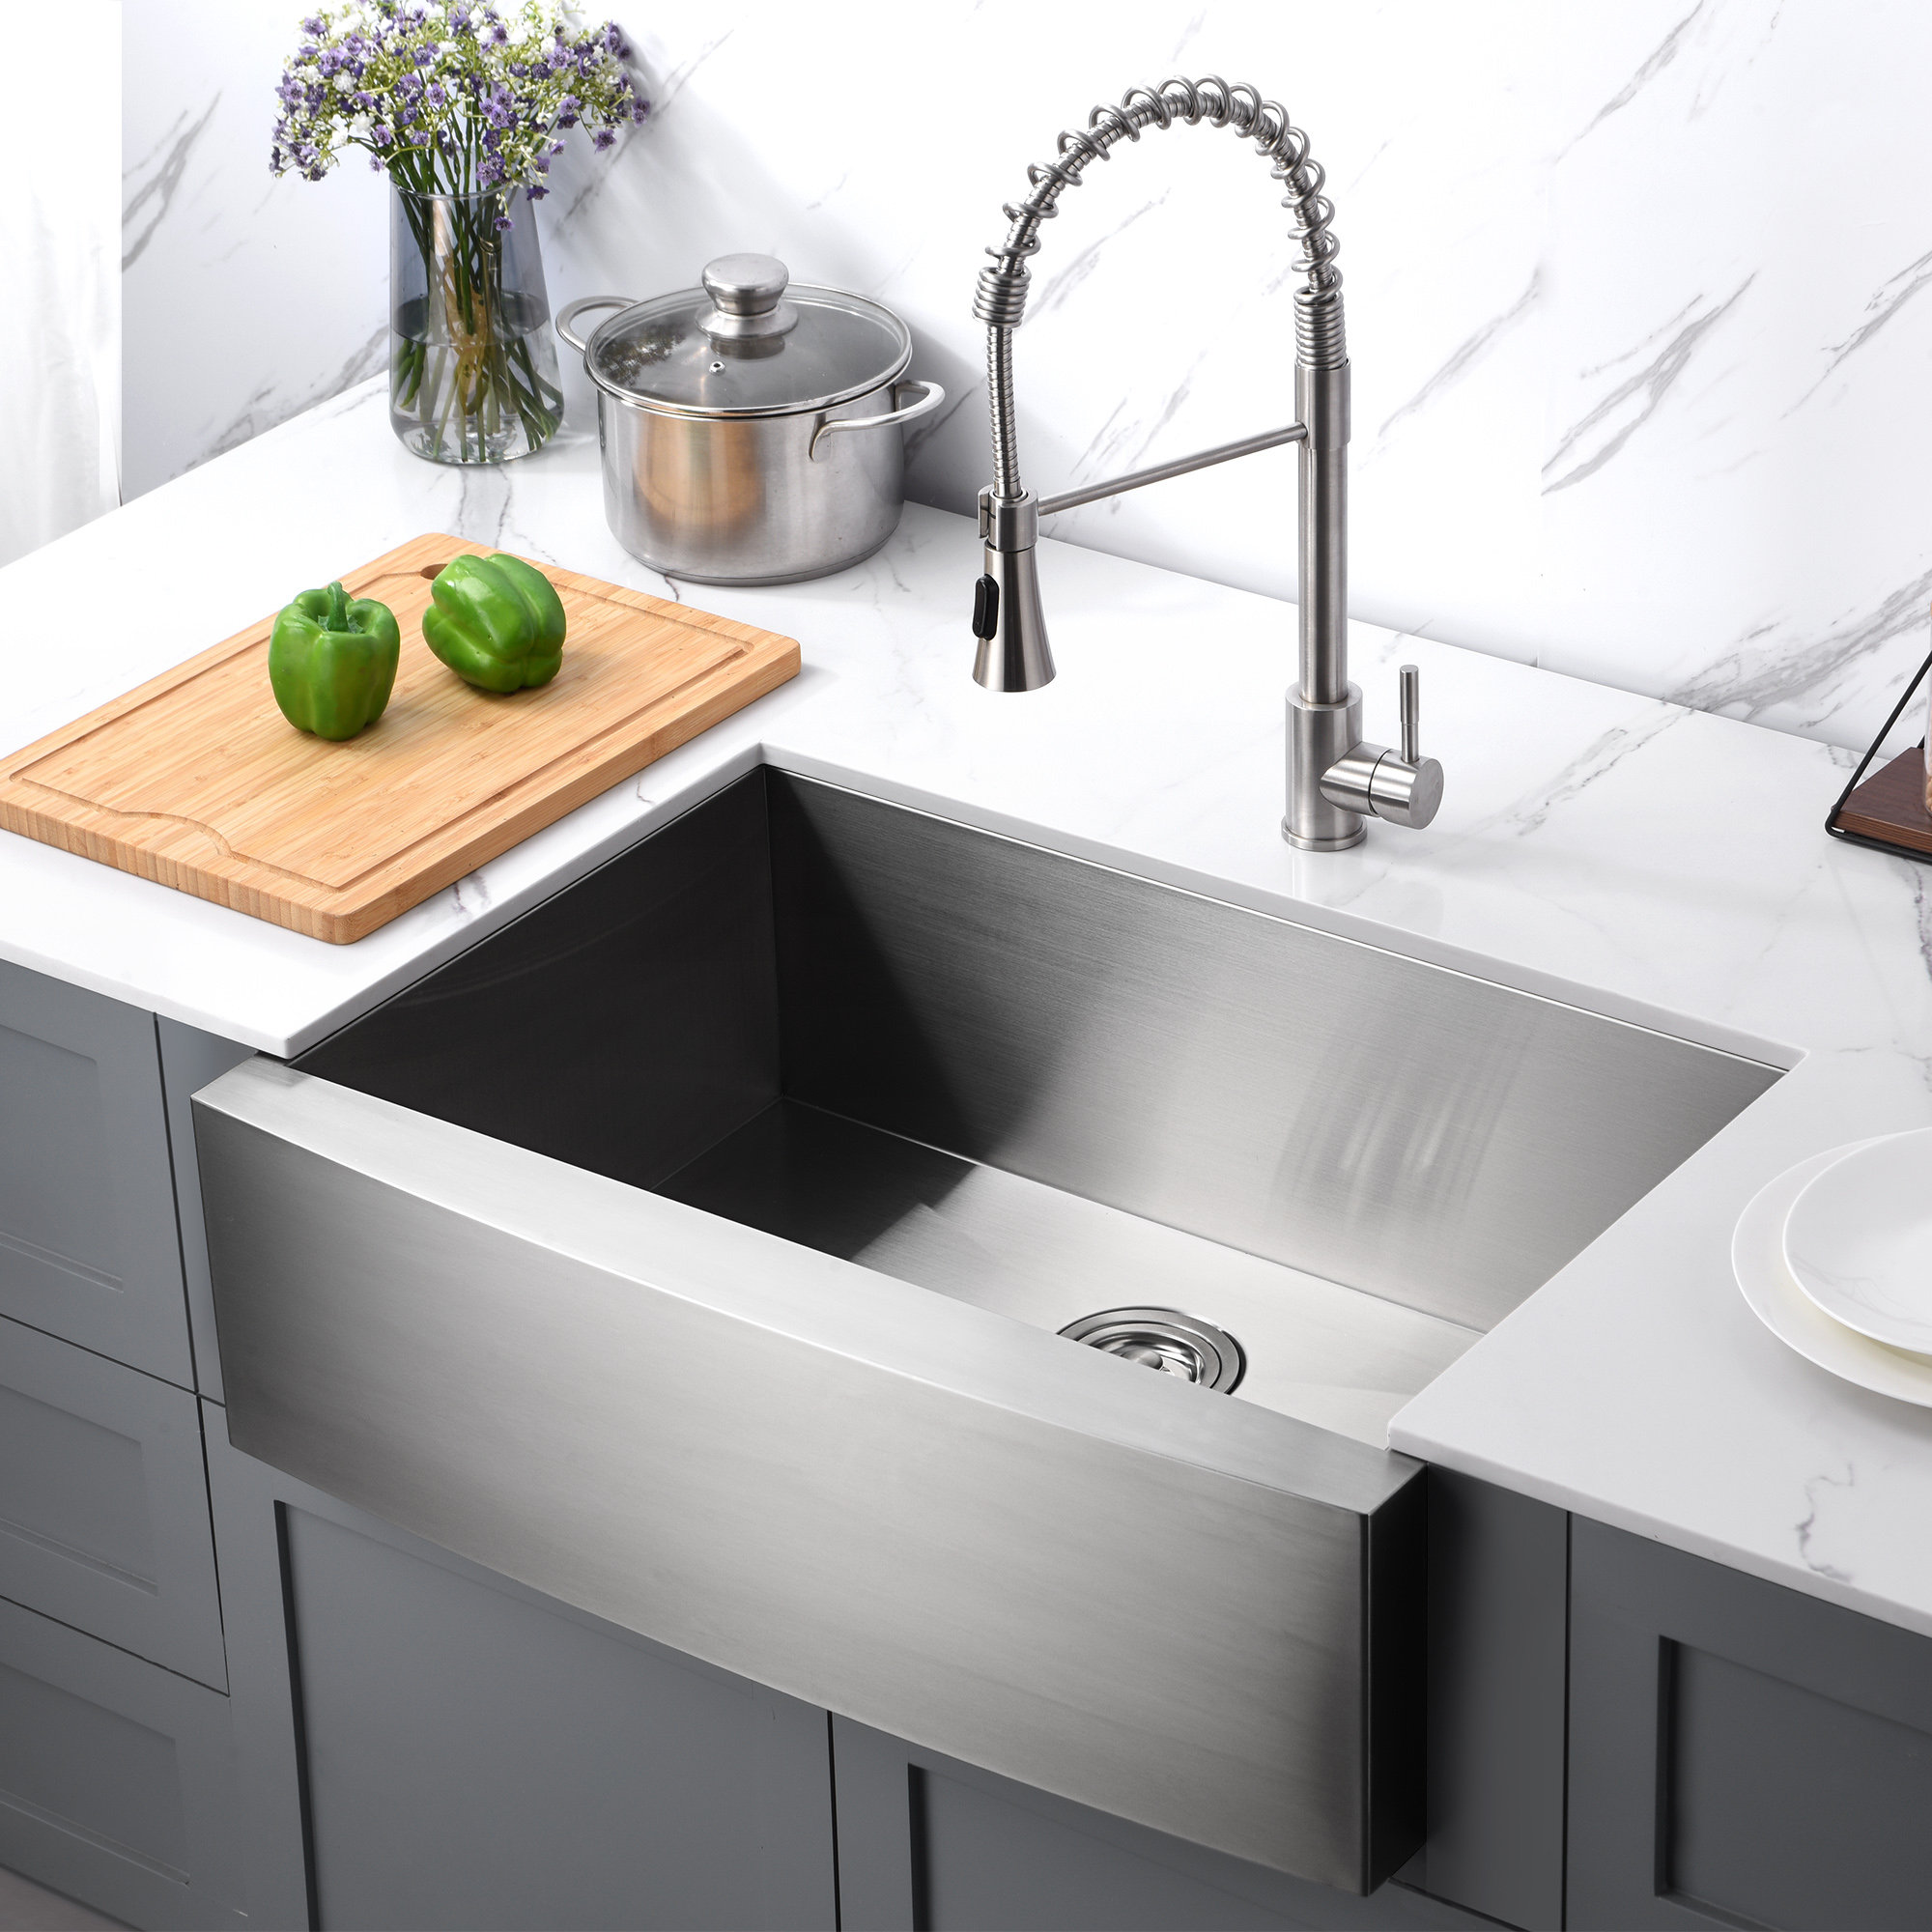 How to Install an Apron Sink in a Stock Cabinet